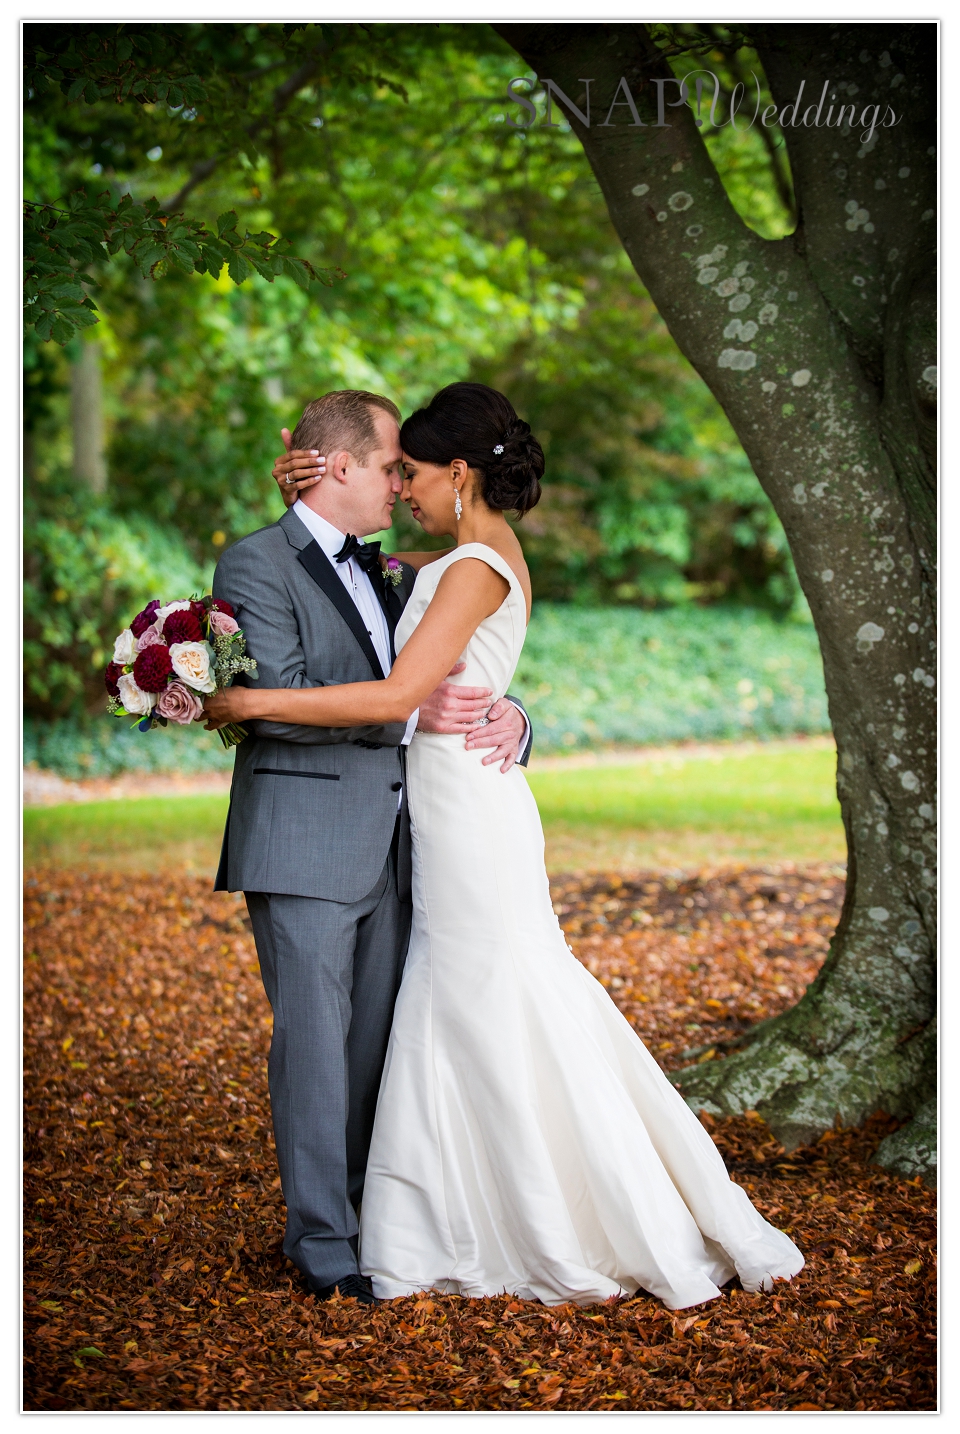 Wedding at the Chanler0013